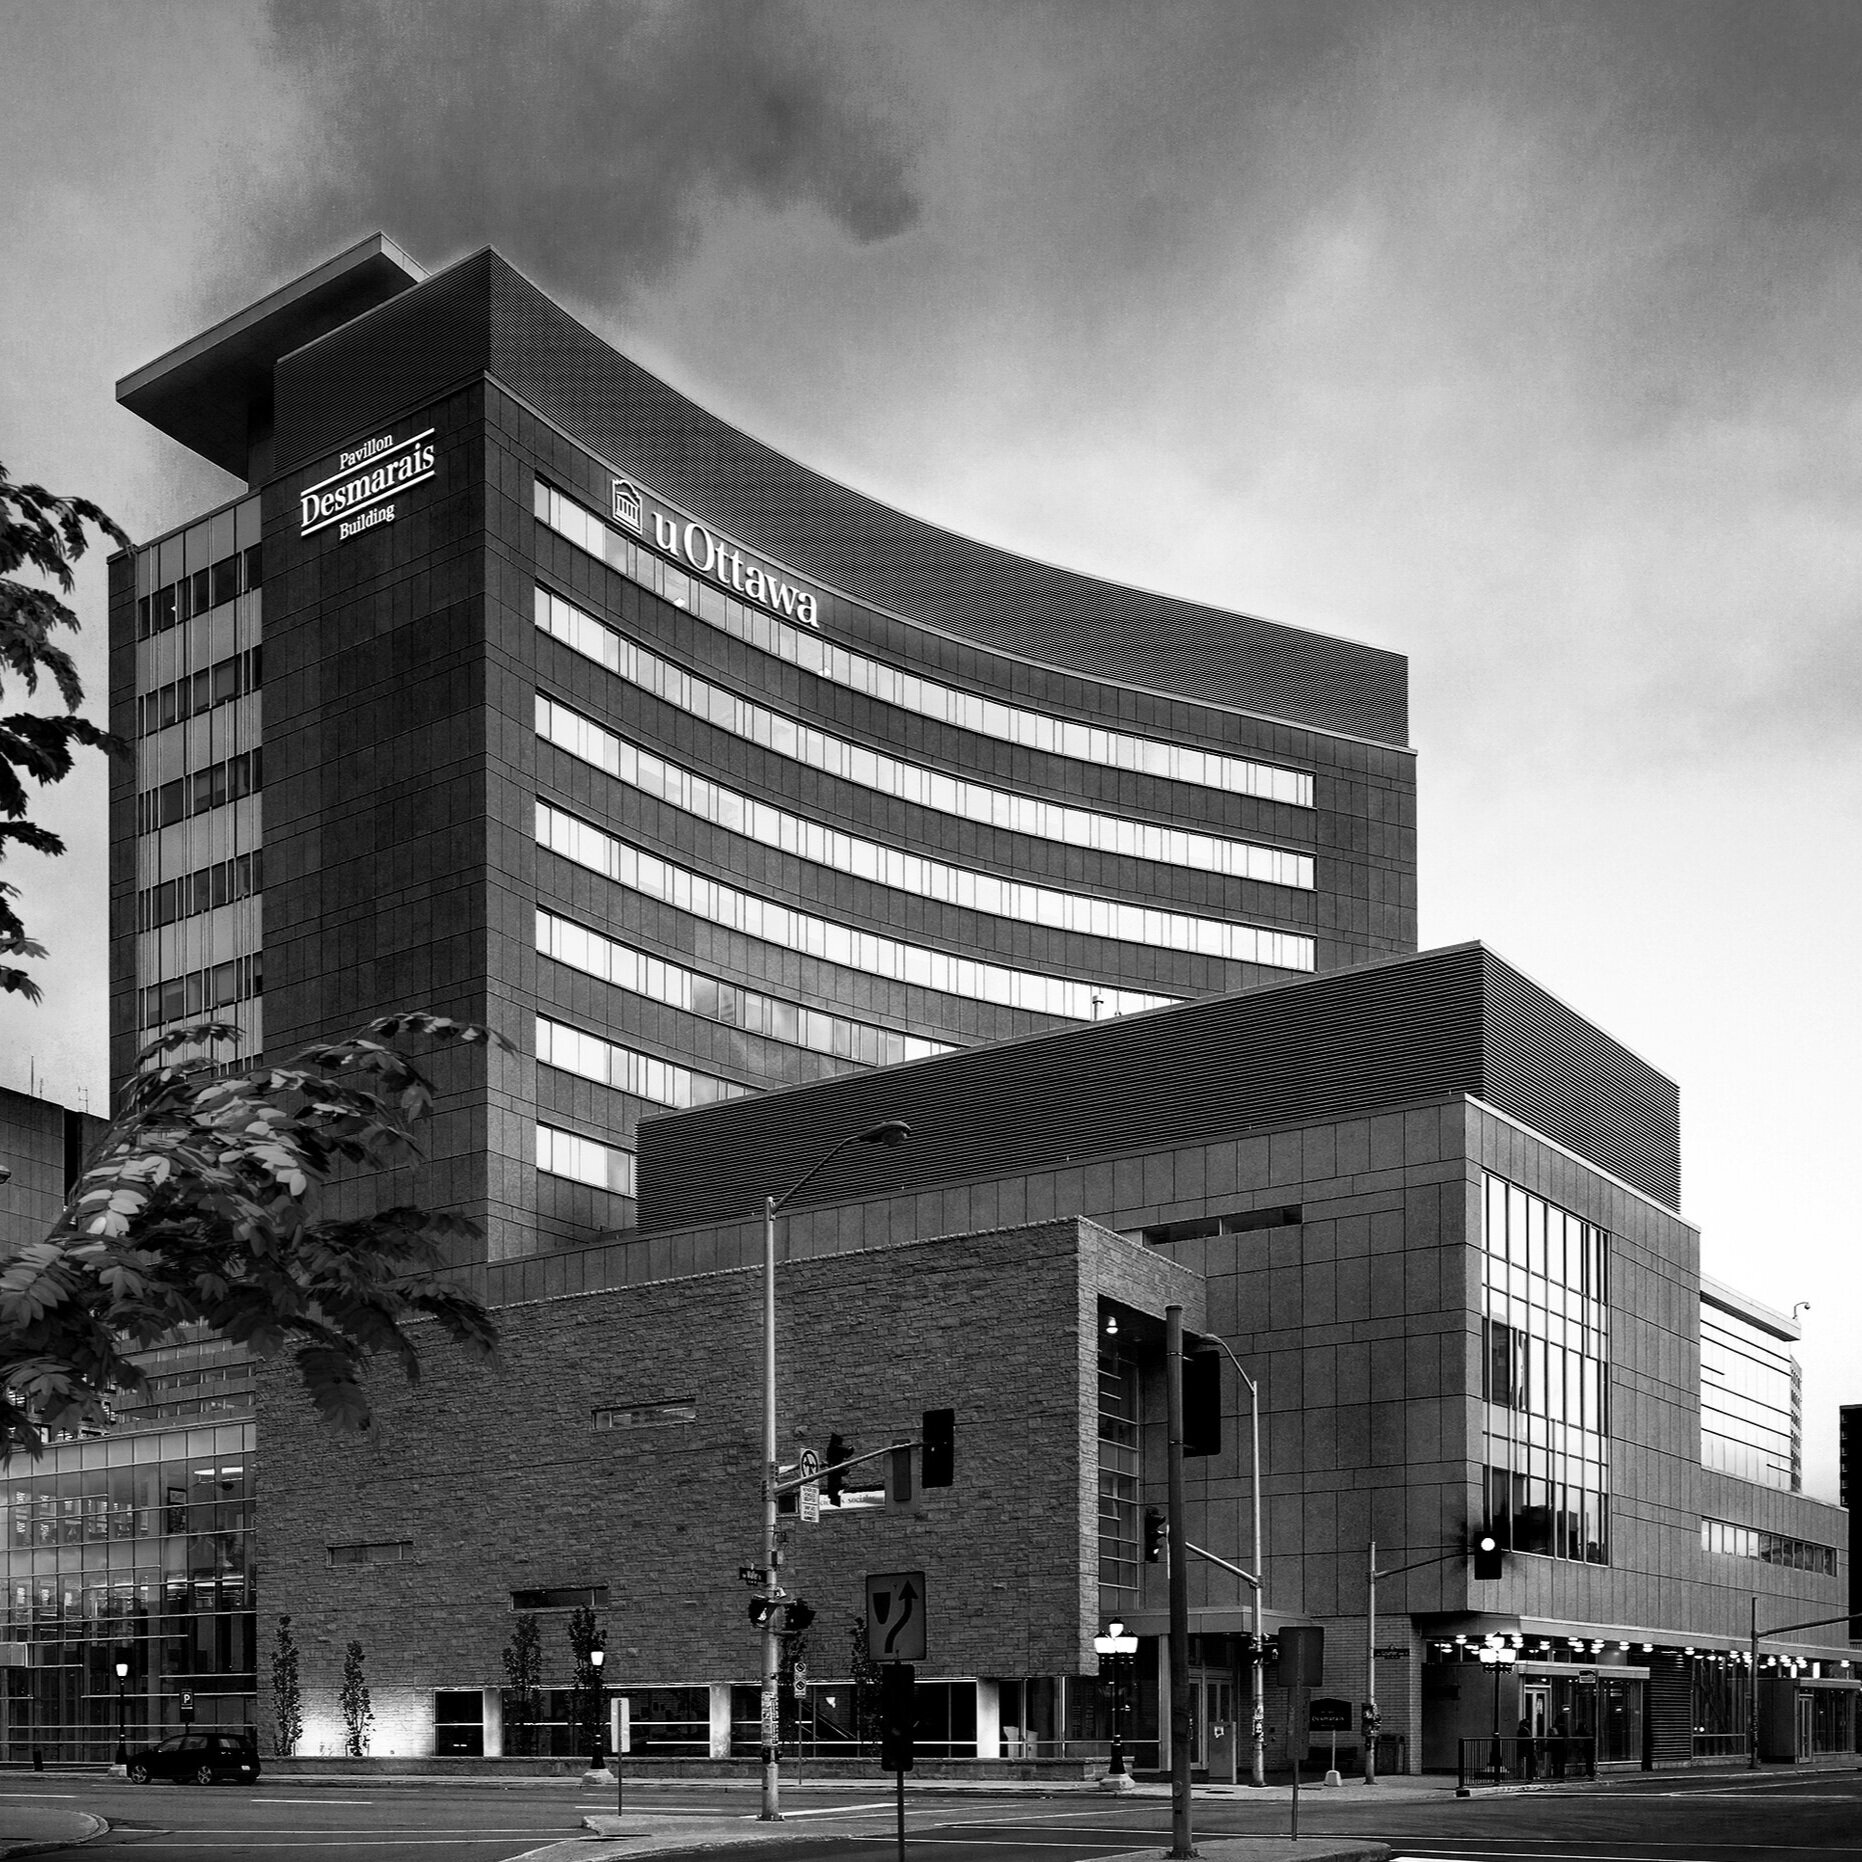 Telfer School of Management, uOttawa - See our case study